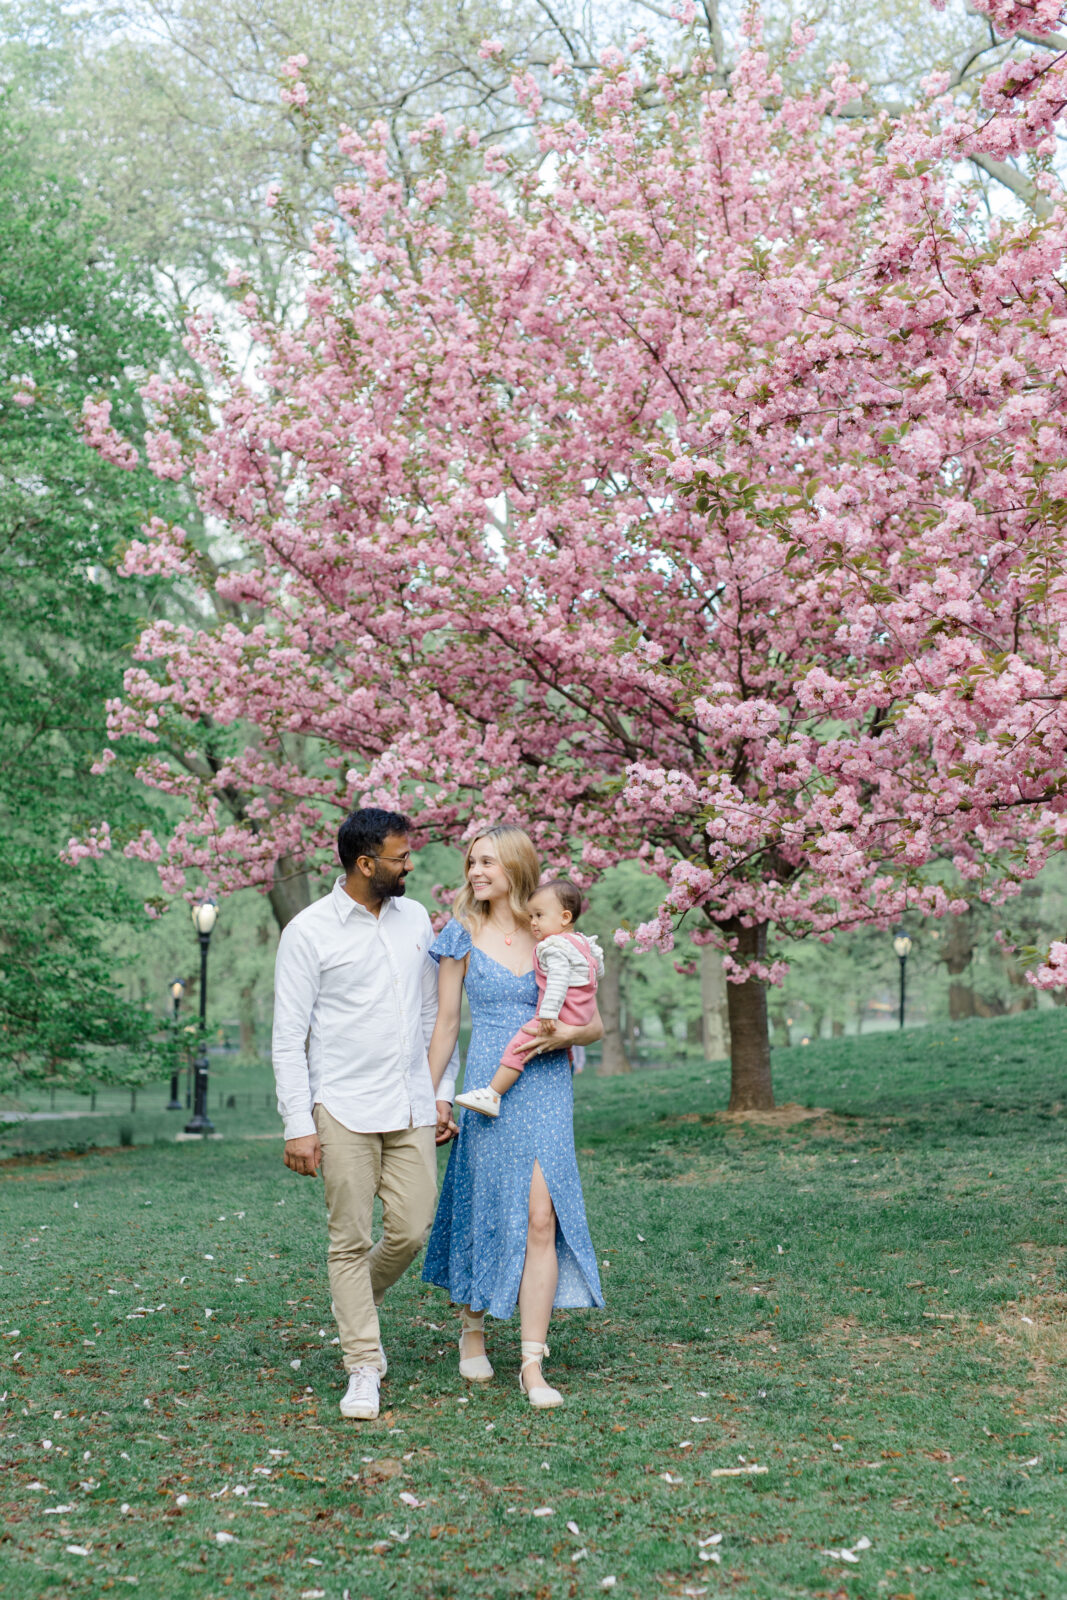 A family walks in front of the cherry blossoms at a spring family mini session in Central Park shot by Jacqueline Clair Photography